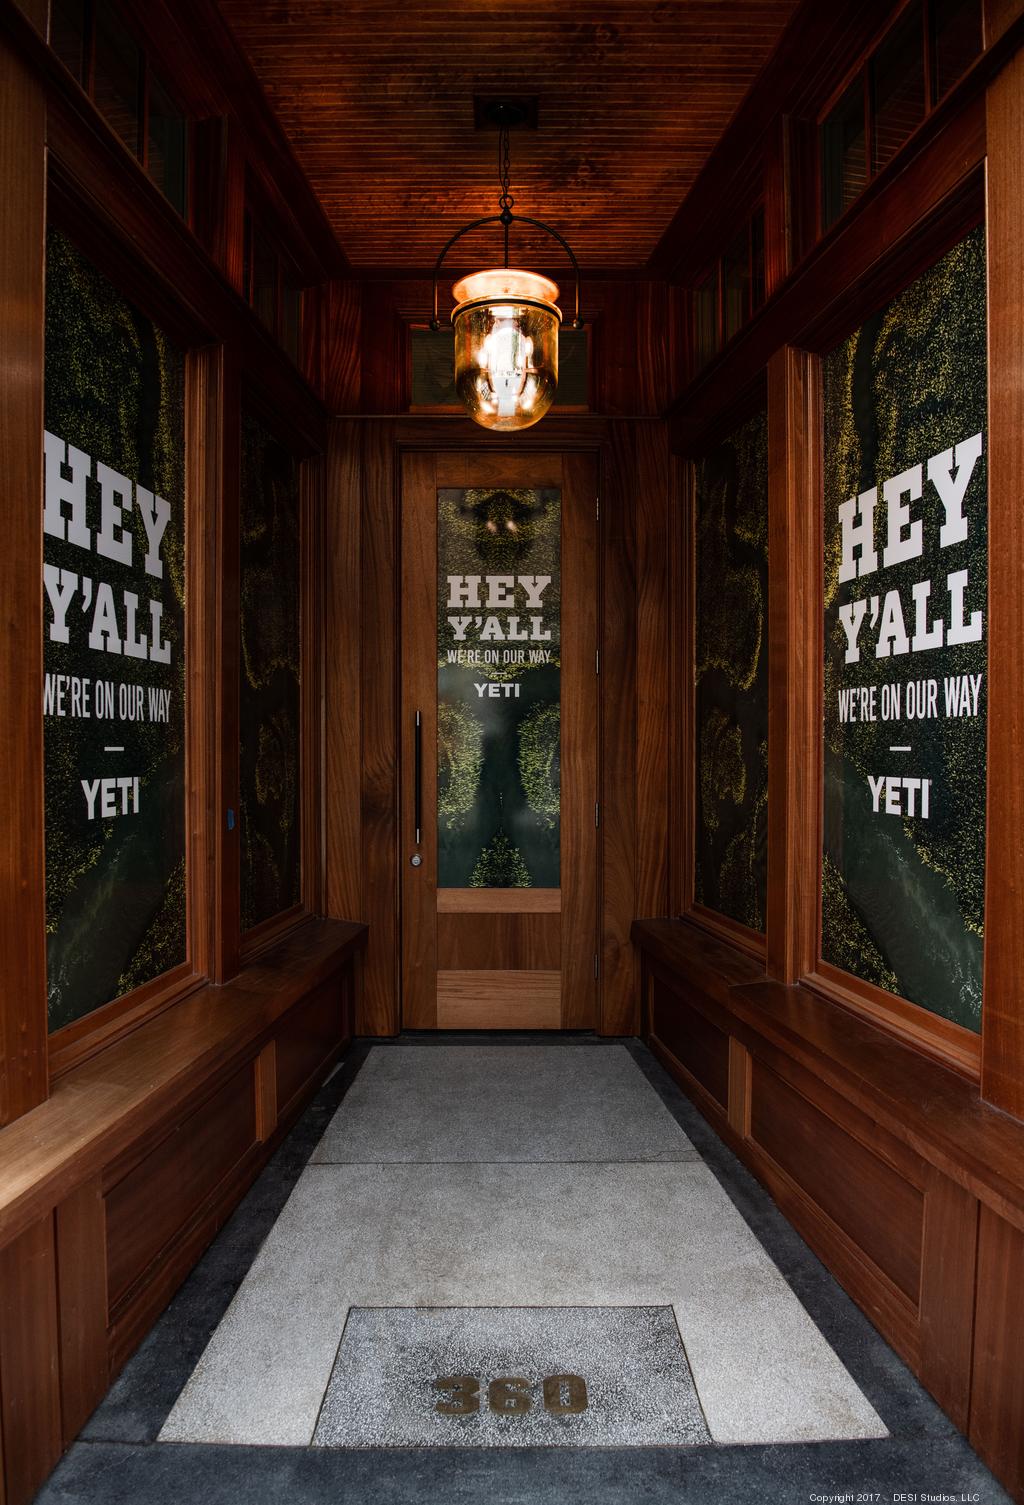 YETI - Hey Dallas - we've opened our new store in